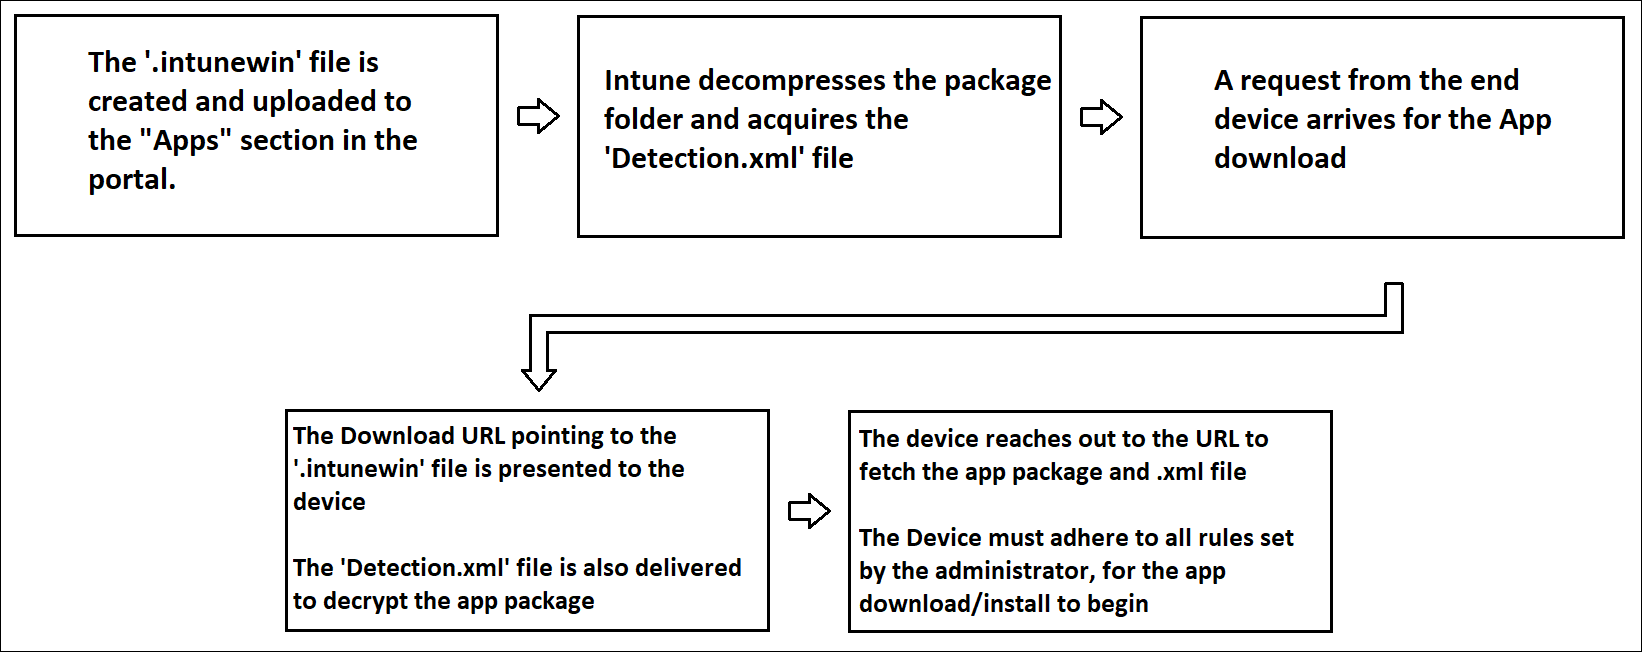 Diagram shows flow of the delivery of a Win32 app to a device through Intune.